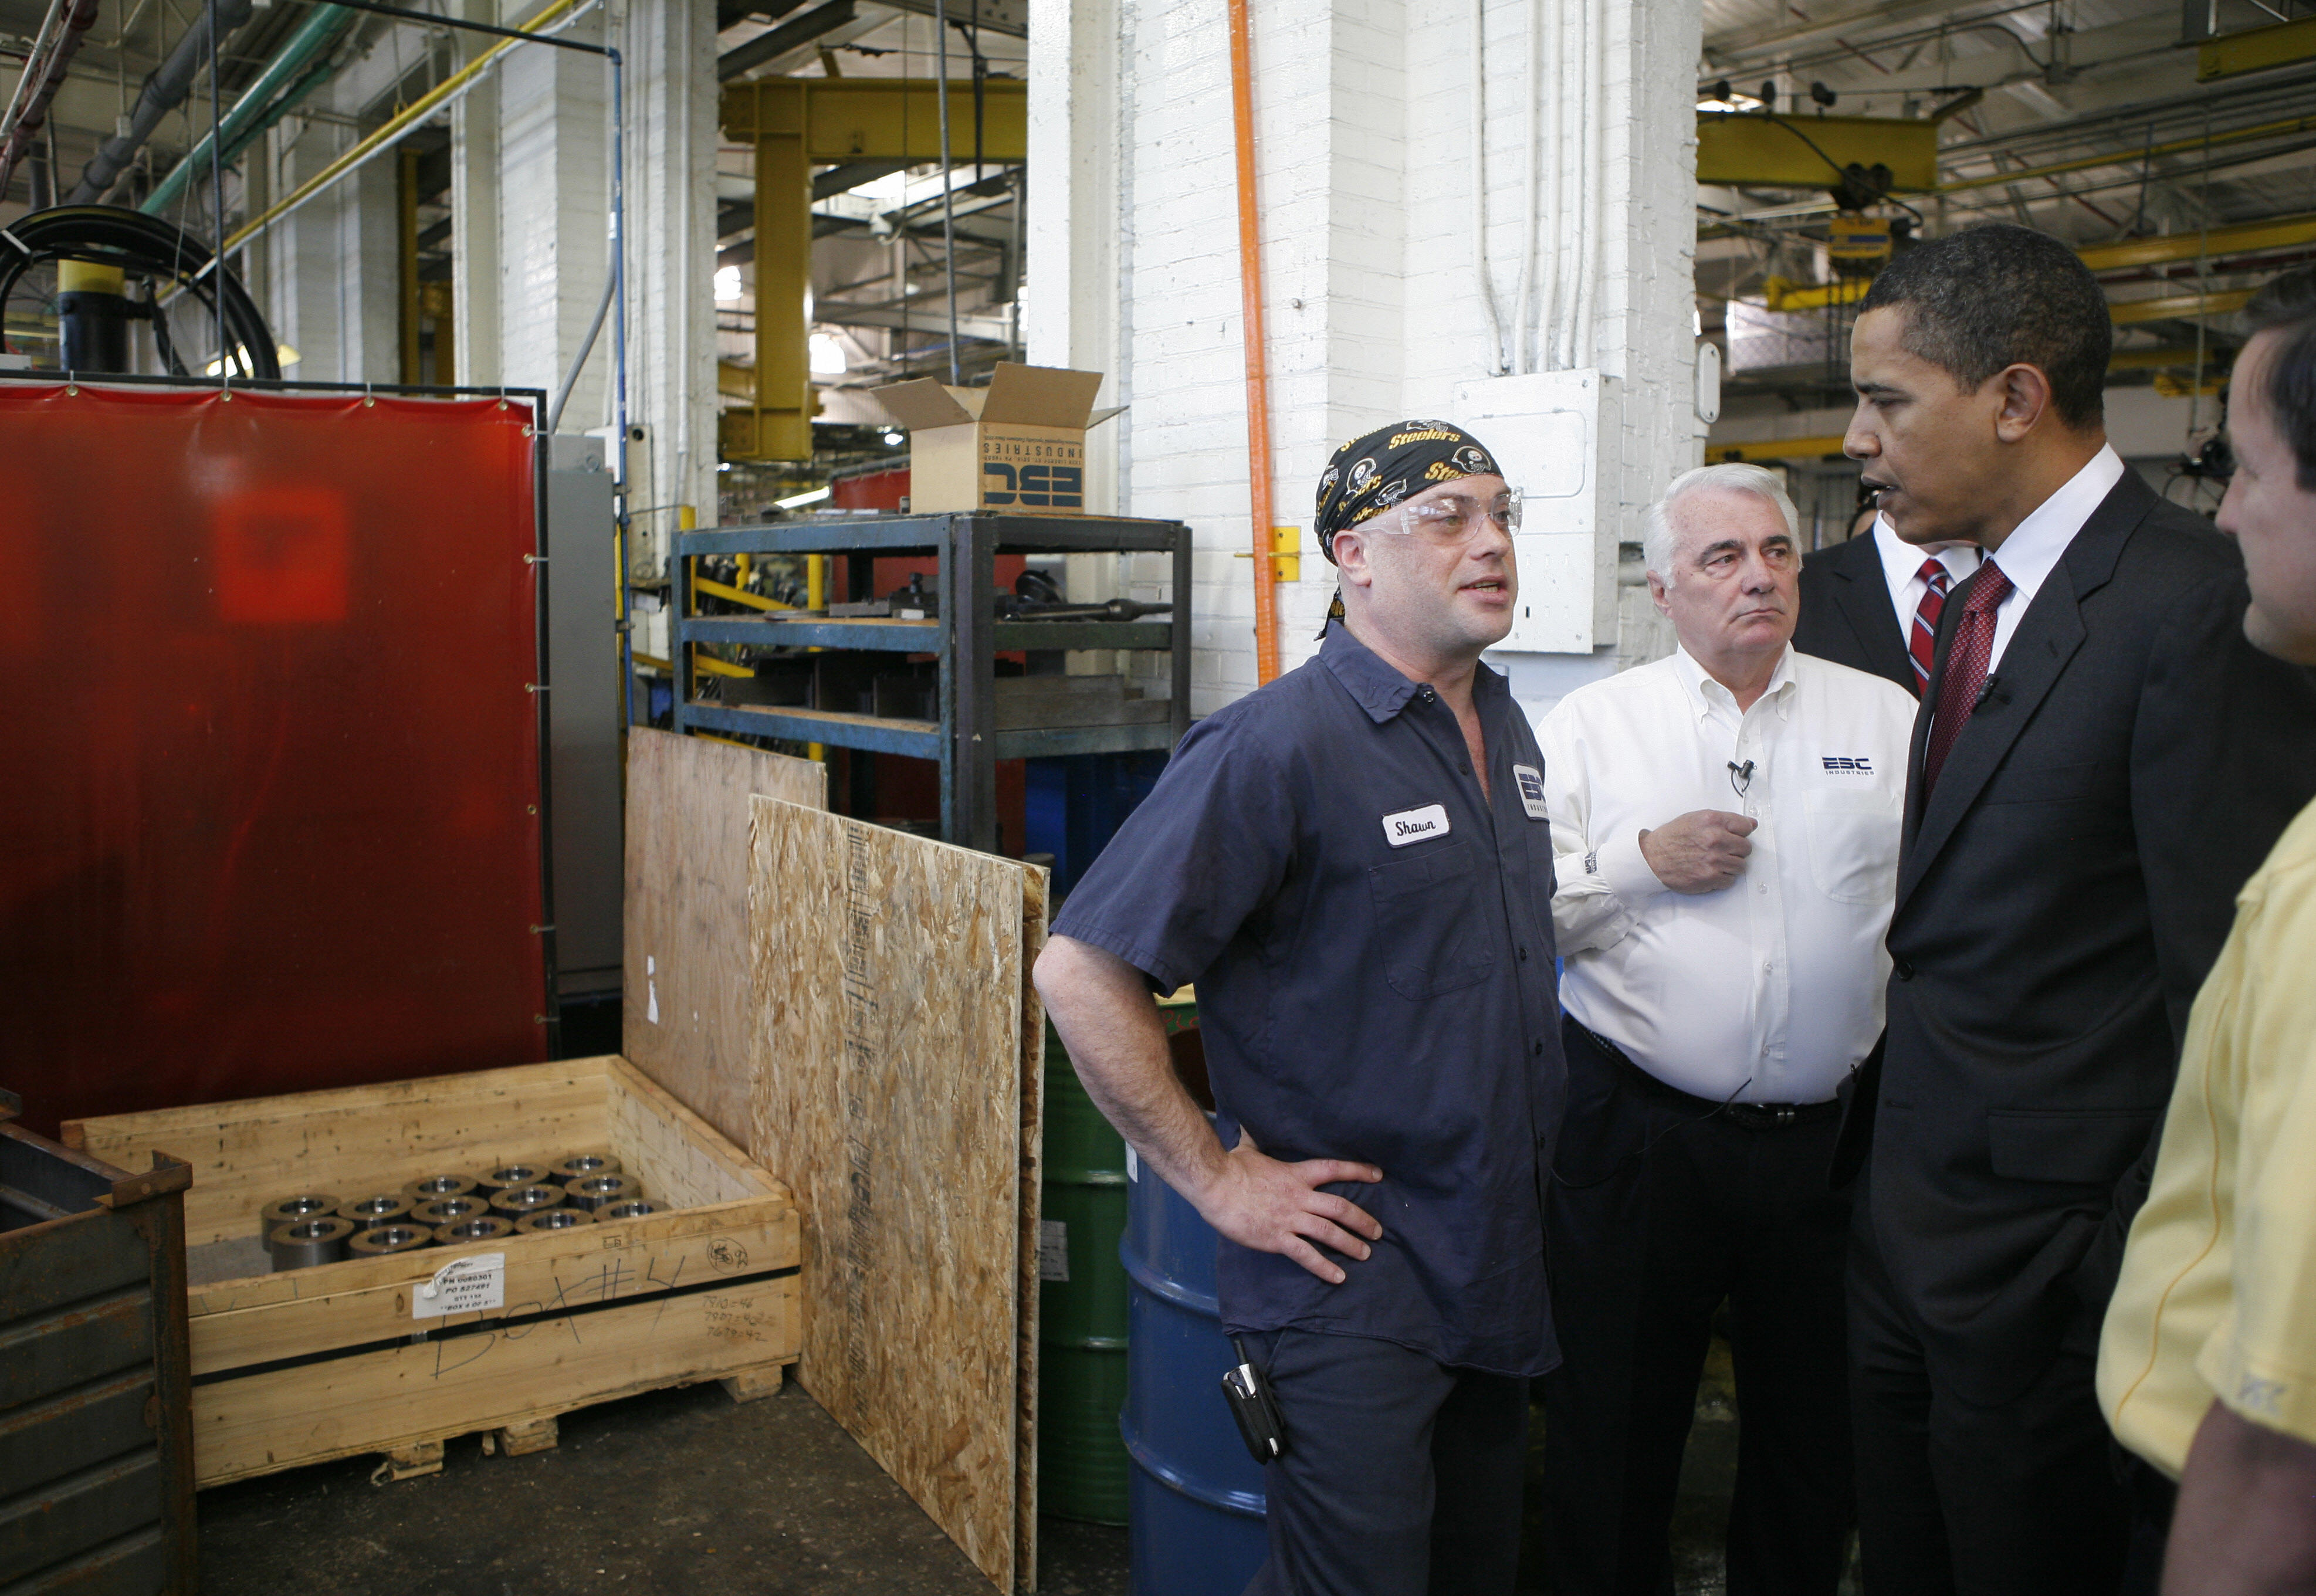 In 2008, then-candidateBarack Obama talks with workers while touring the bolt manufacturer Erie Bolt Company in Erie, Pennsylvania